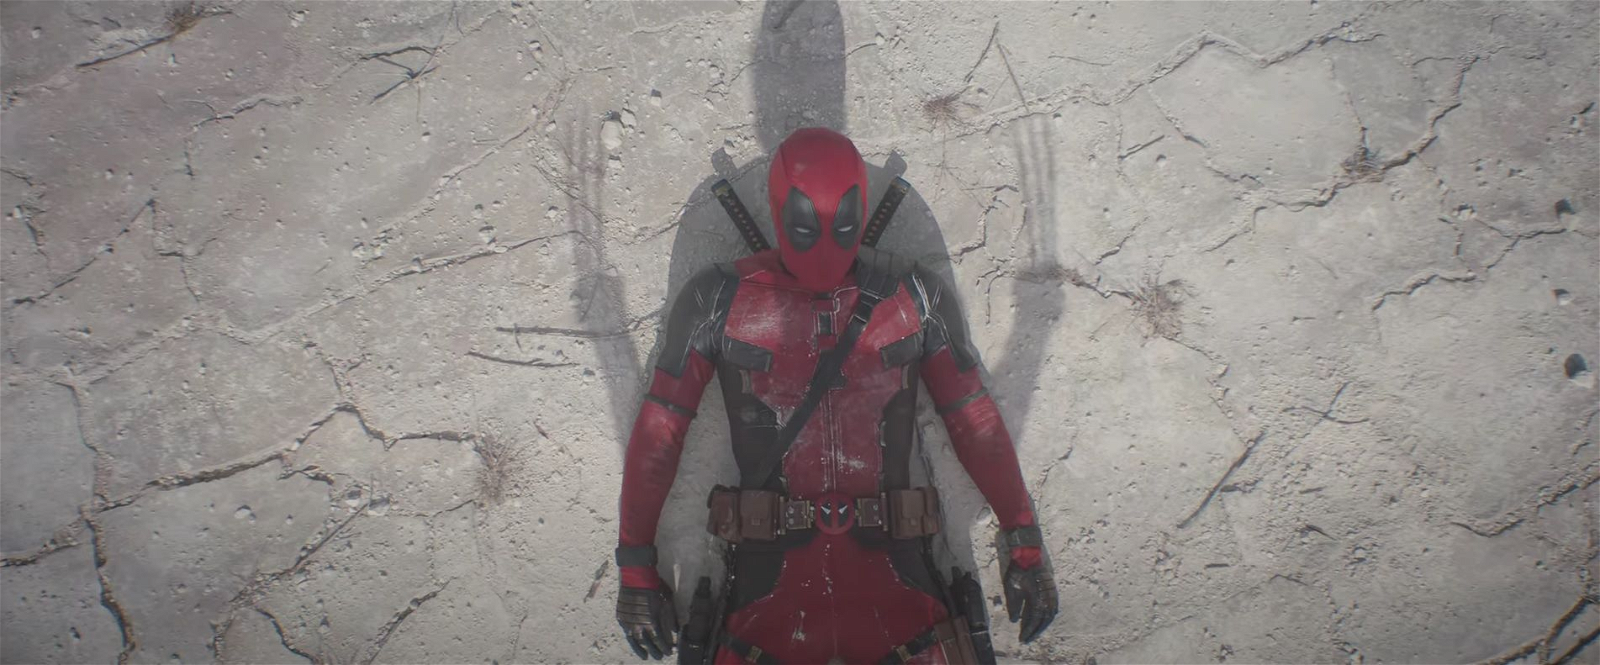 Deadpool in action in this scene 